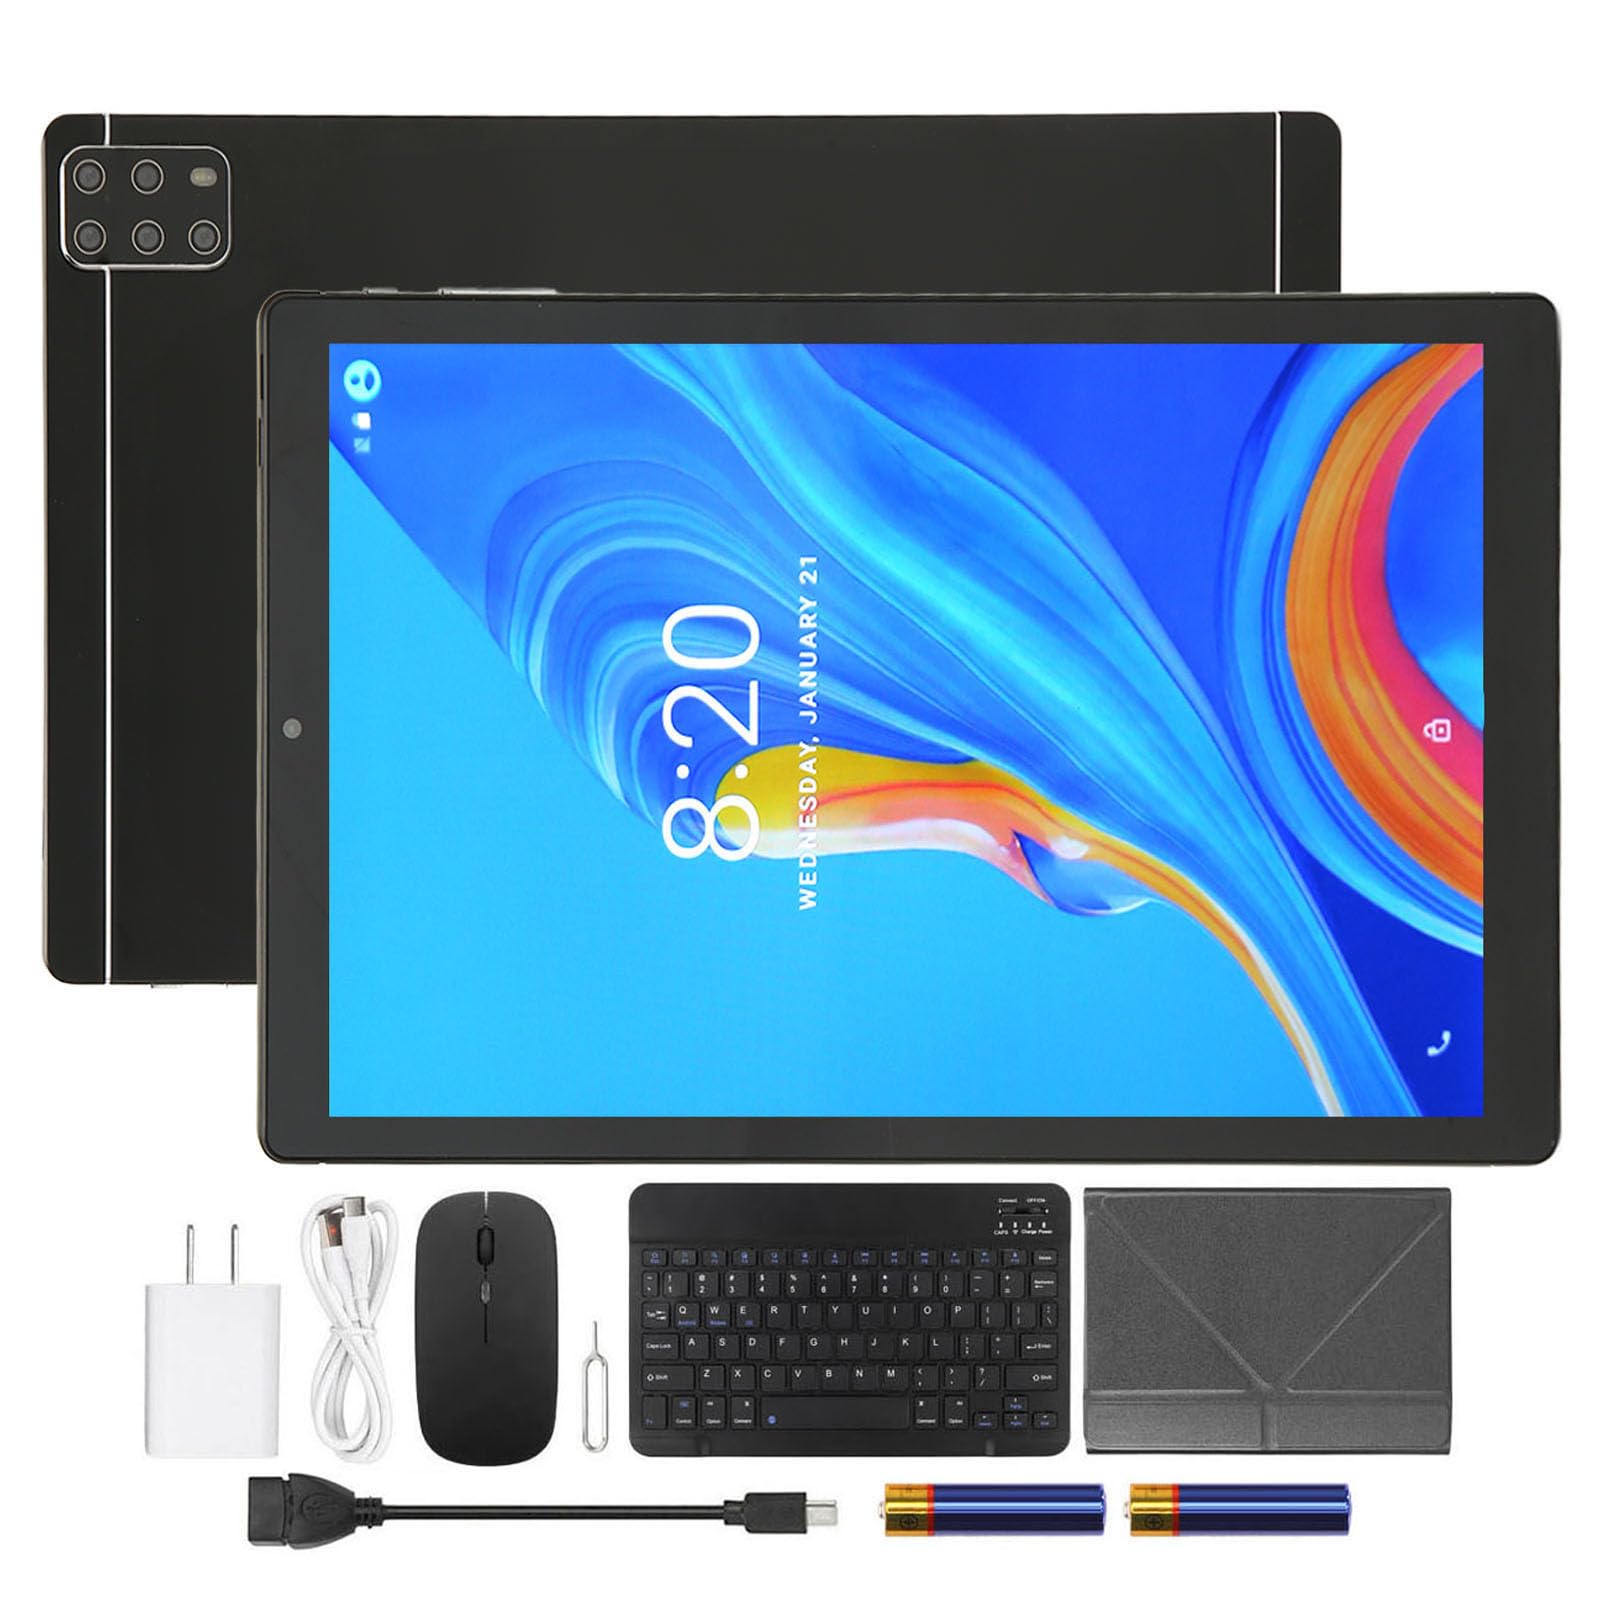 Airshi 2 in 1 Tablet, Dual Speakers 1960x1080 Tablet with Keyboard for Study (US Plug)